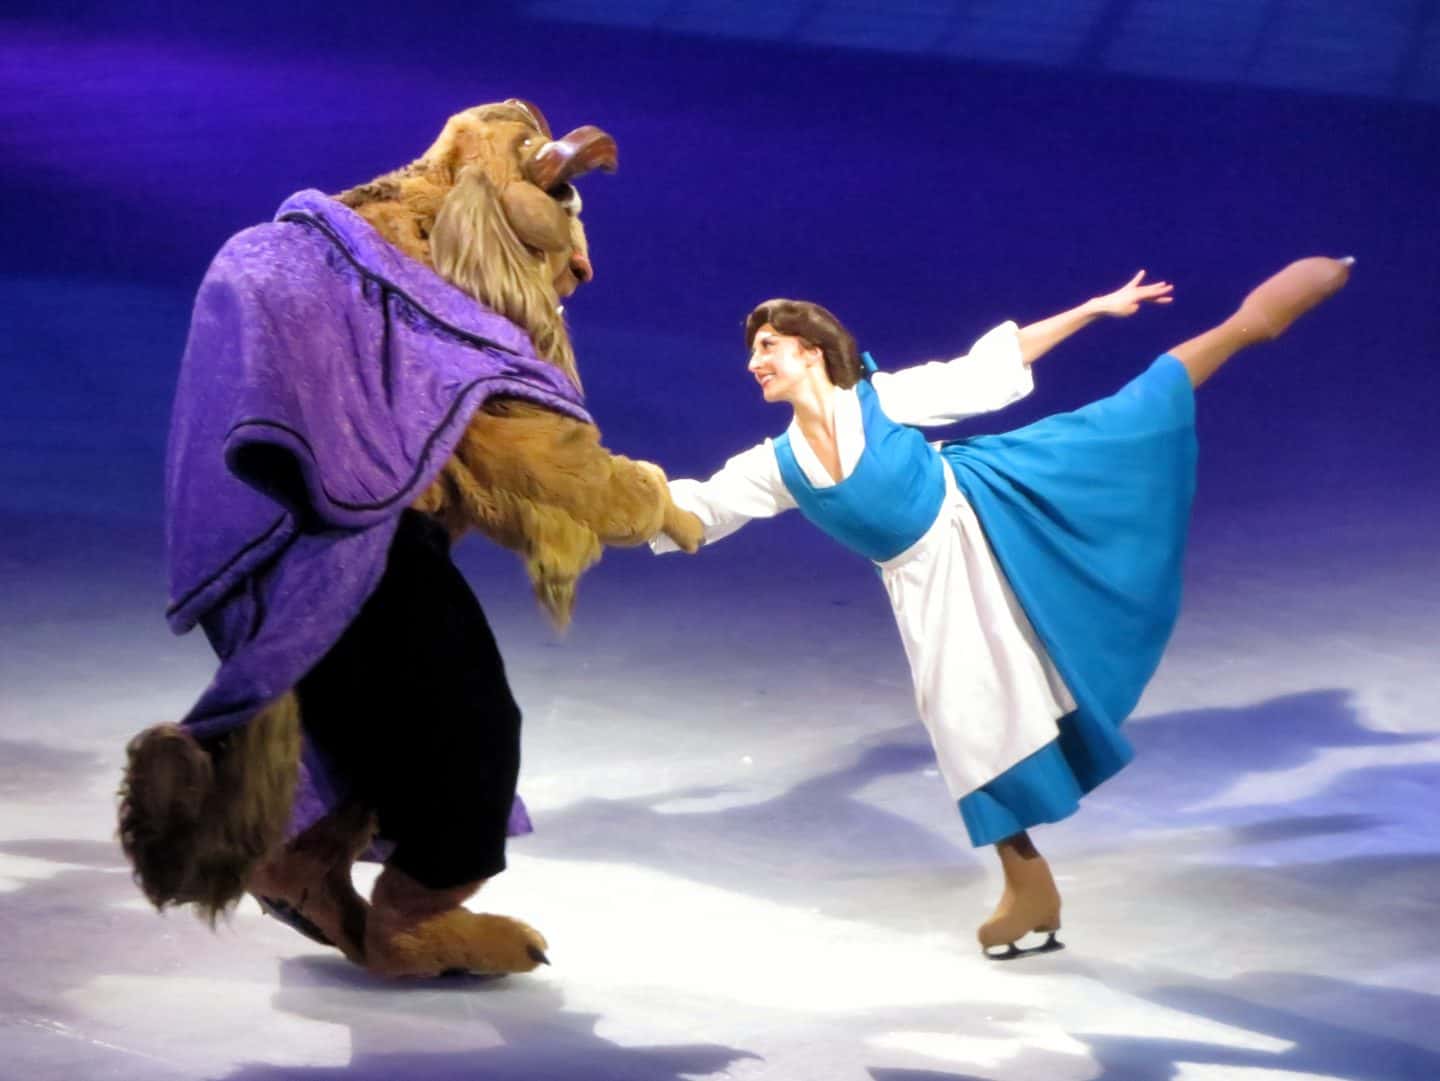 Beauty and the Beast dancing